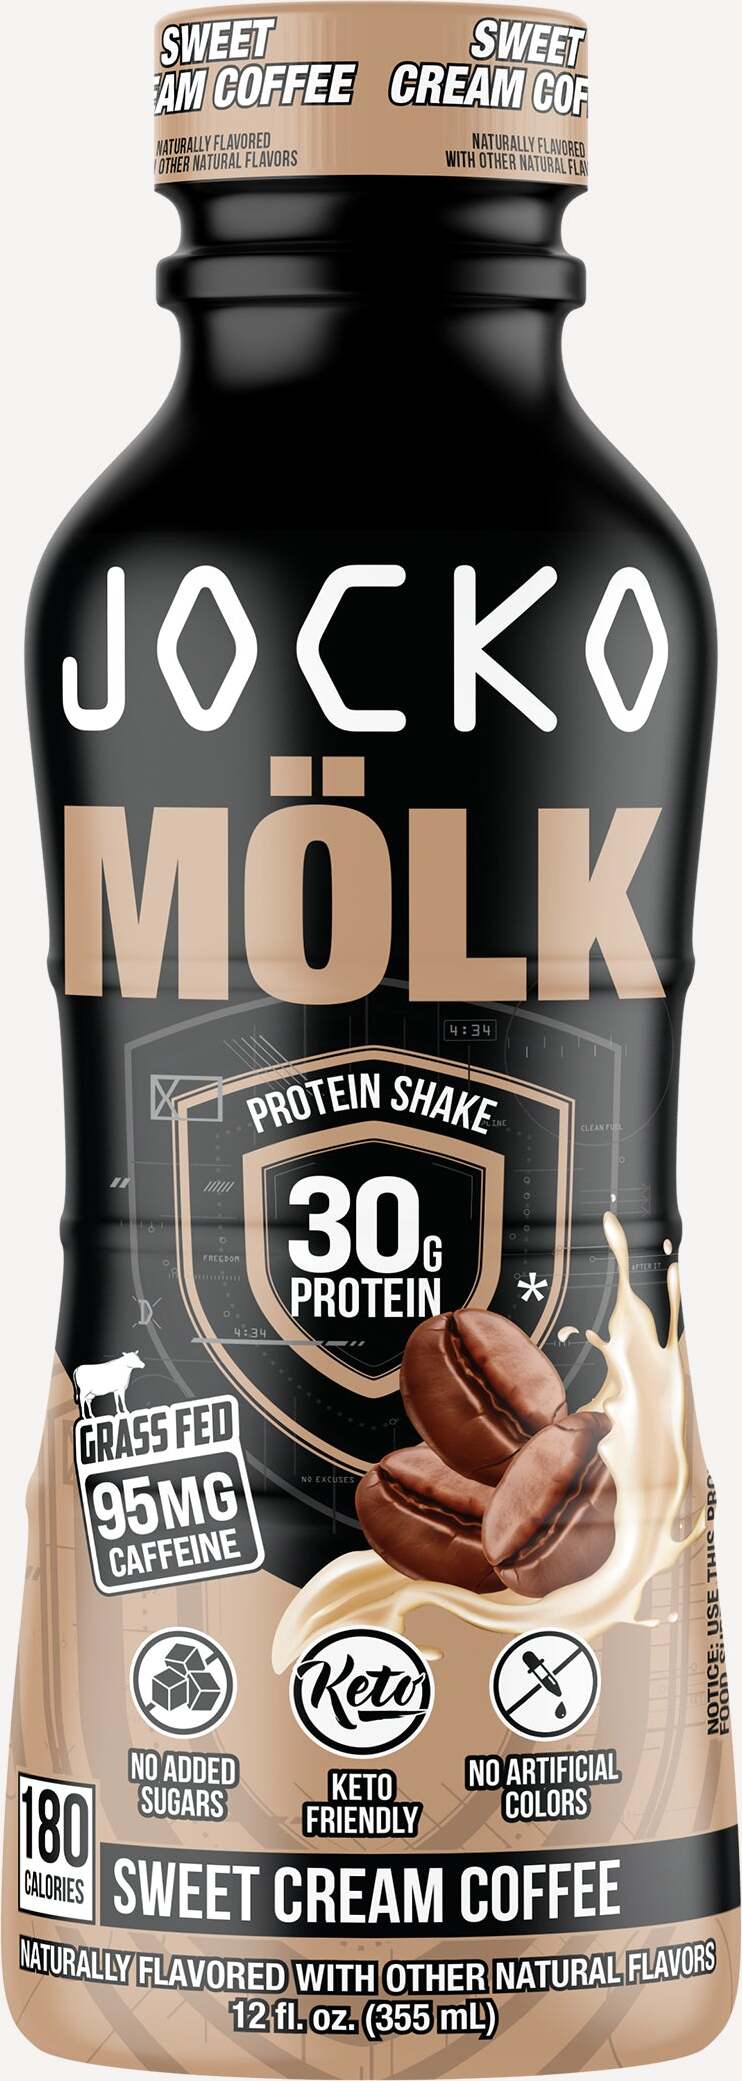 https://www.priceplow.com/static/images/products/jocko-fuel-molk-protein-rtd.jpg